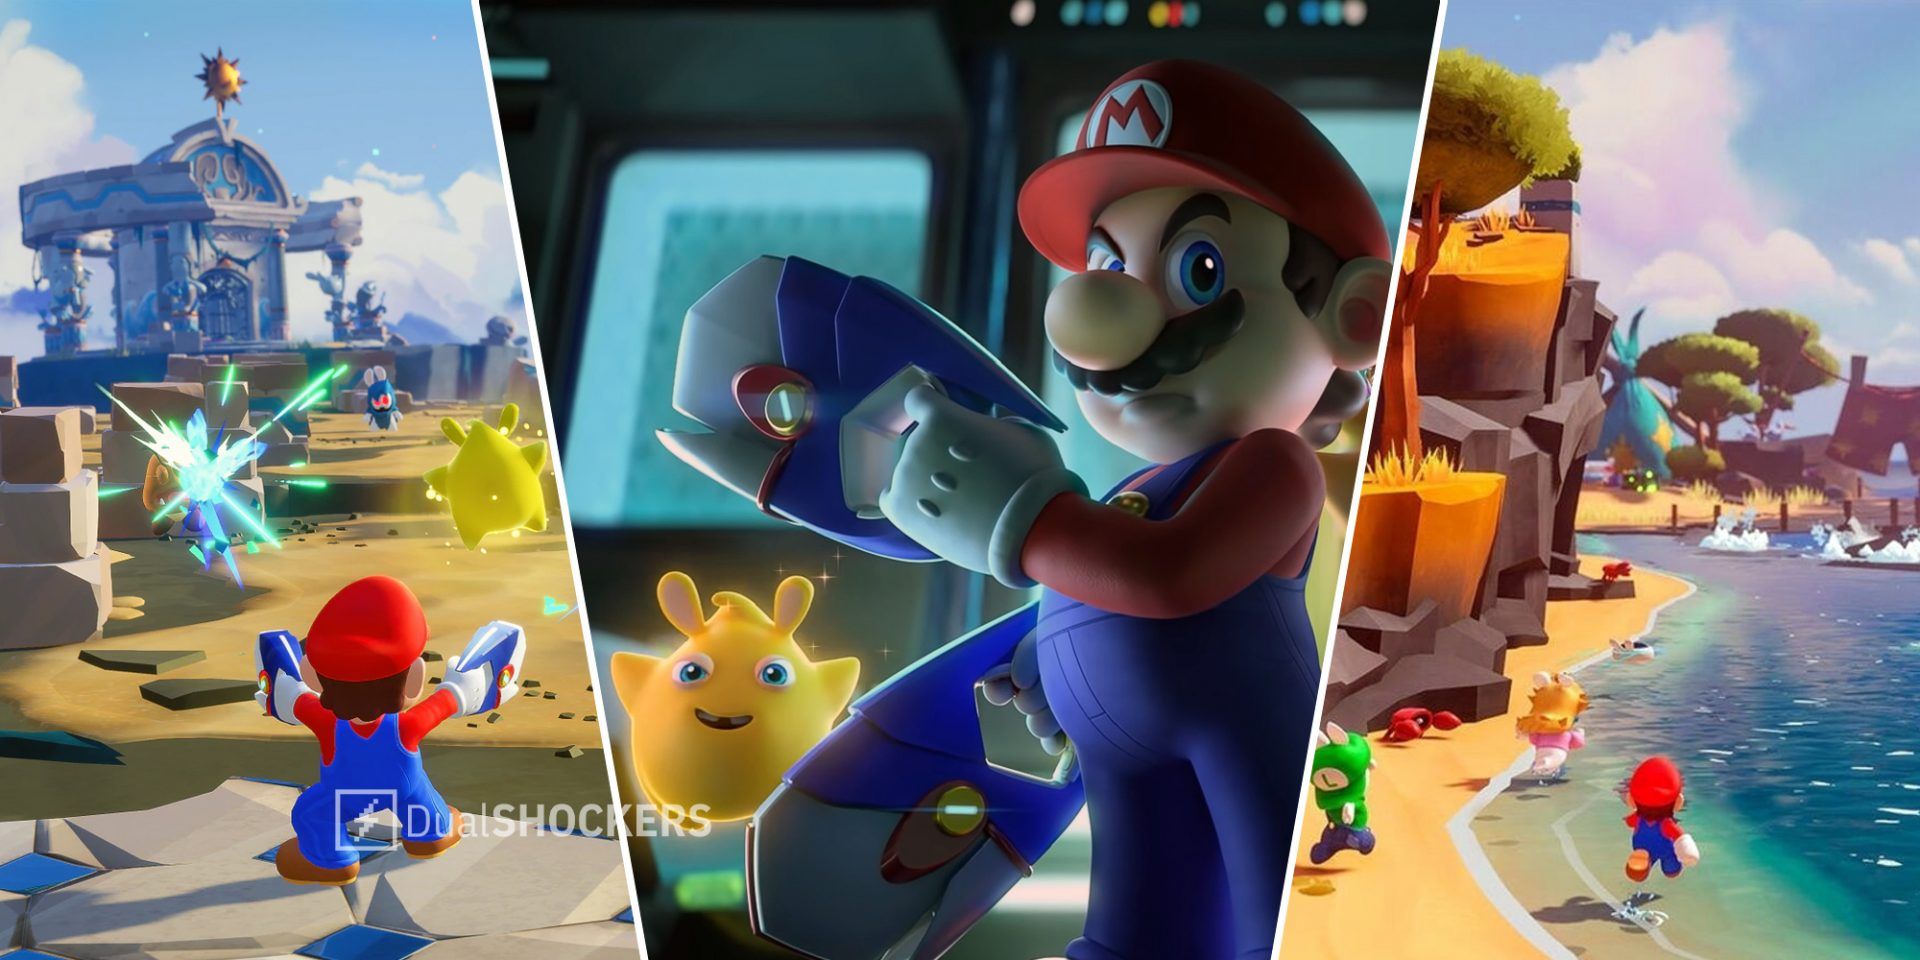 Mario + Rabbids Sparks of Hope Mario shooting on left, Mario with gun in middle, Mario on beach on right